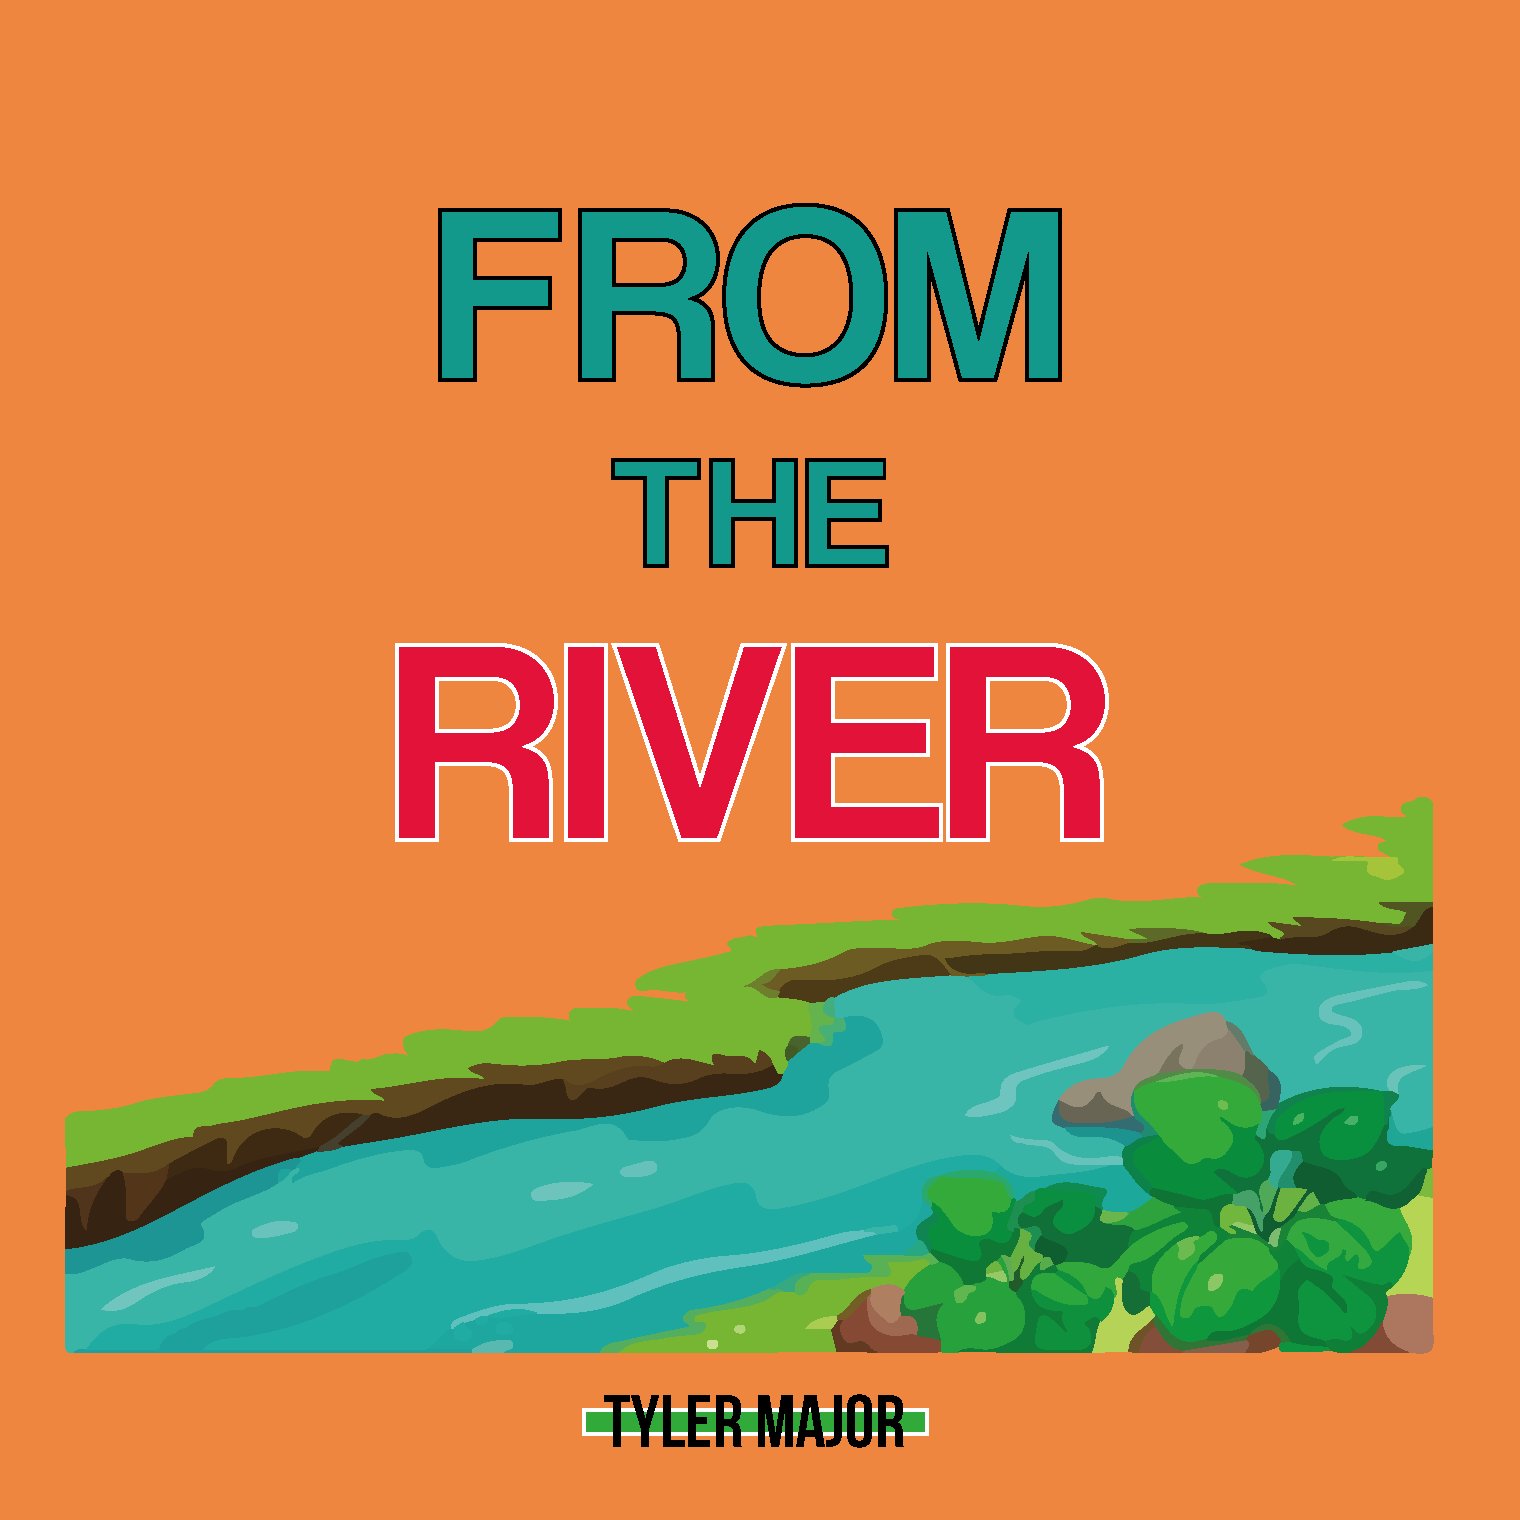  https://itunes.apple.com/us/album/from-the-river-ep/id1033274819 